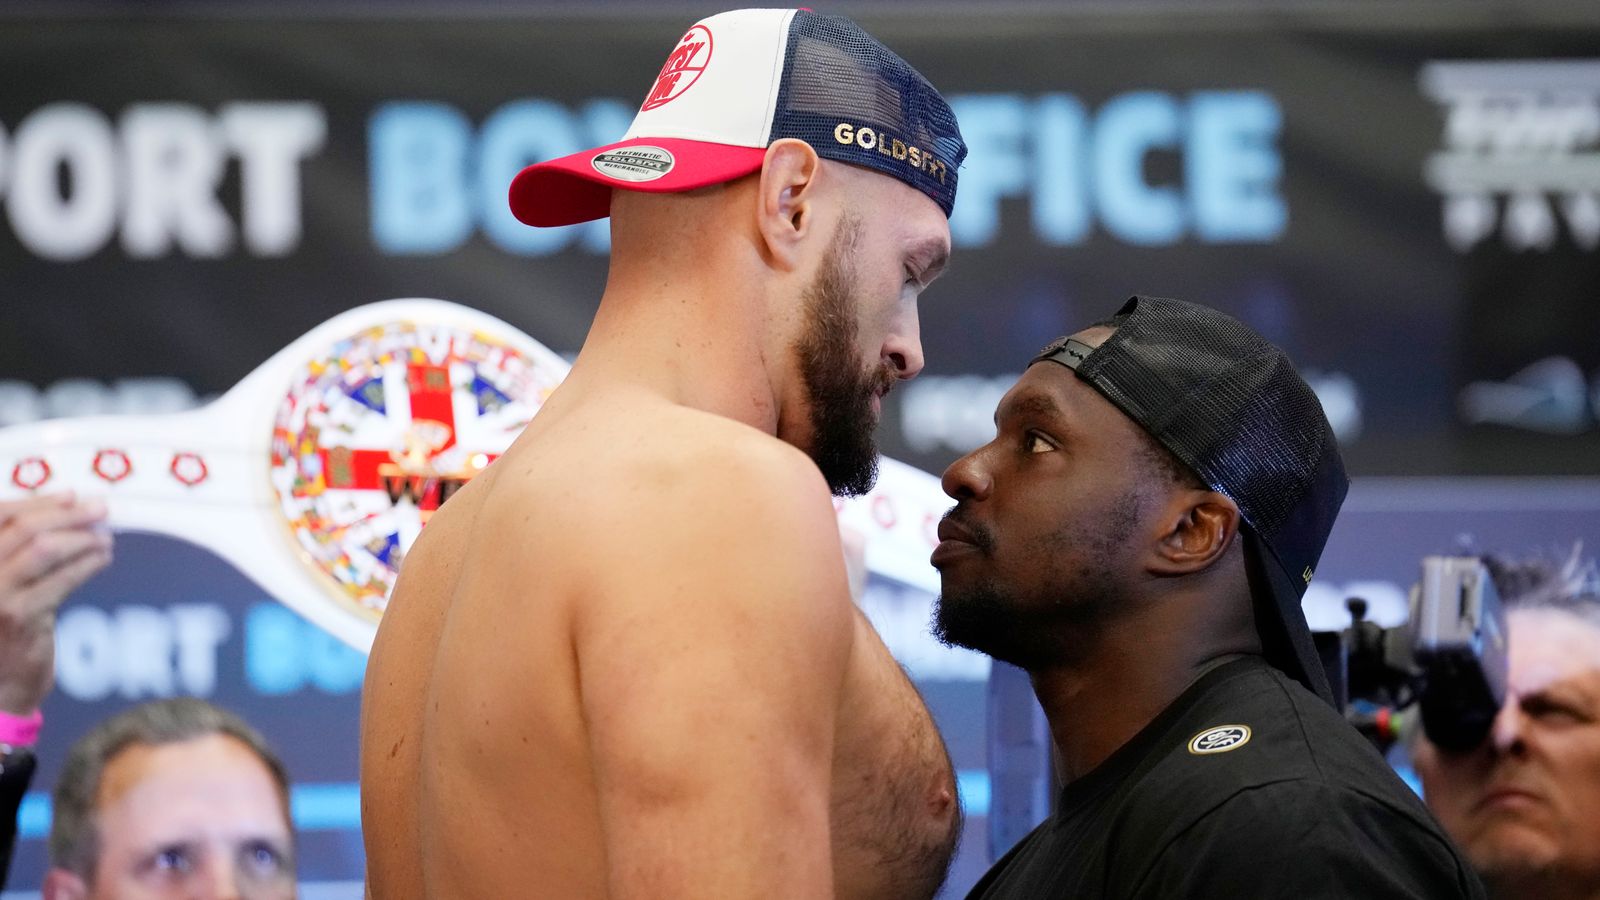 Tyson Fury: WBC heavyweight title holder weighs in heavier than opponent Dillian Whyte for Wembley date - Sky Sports